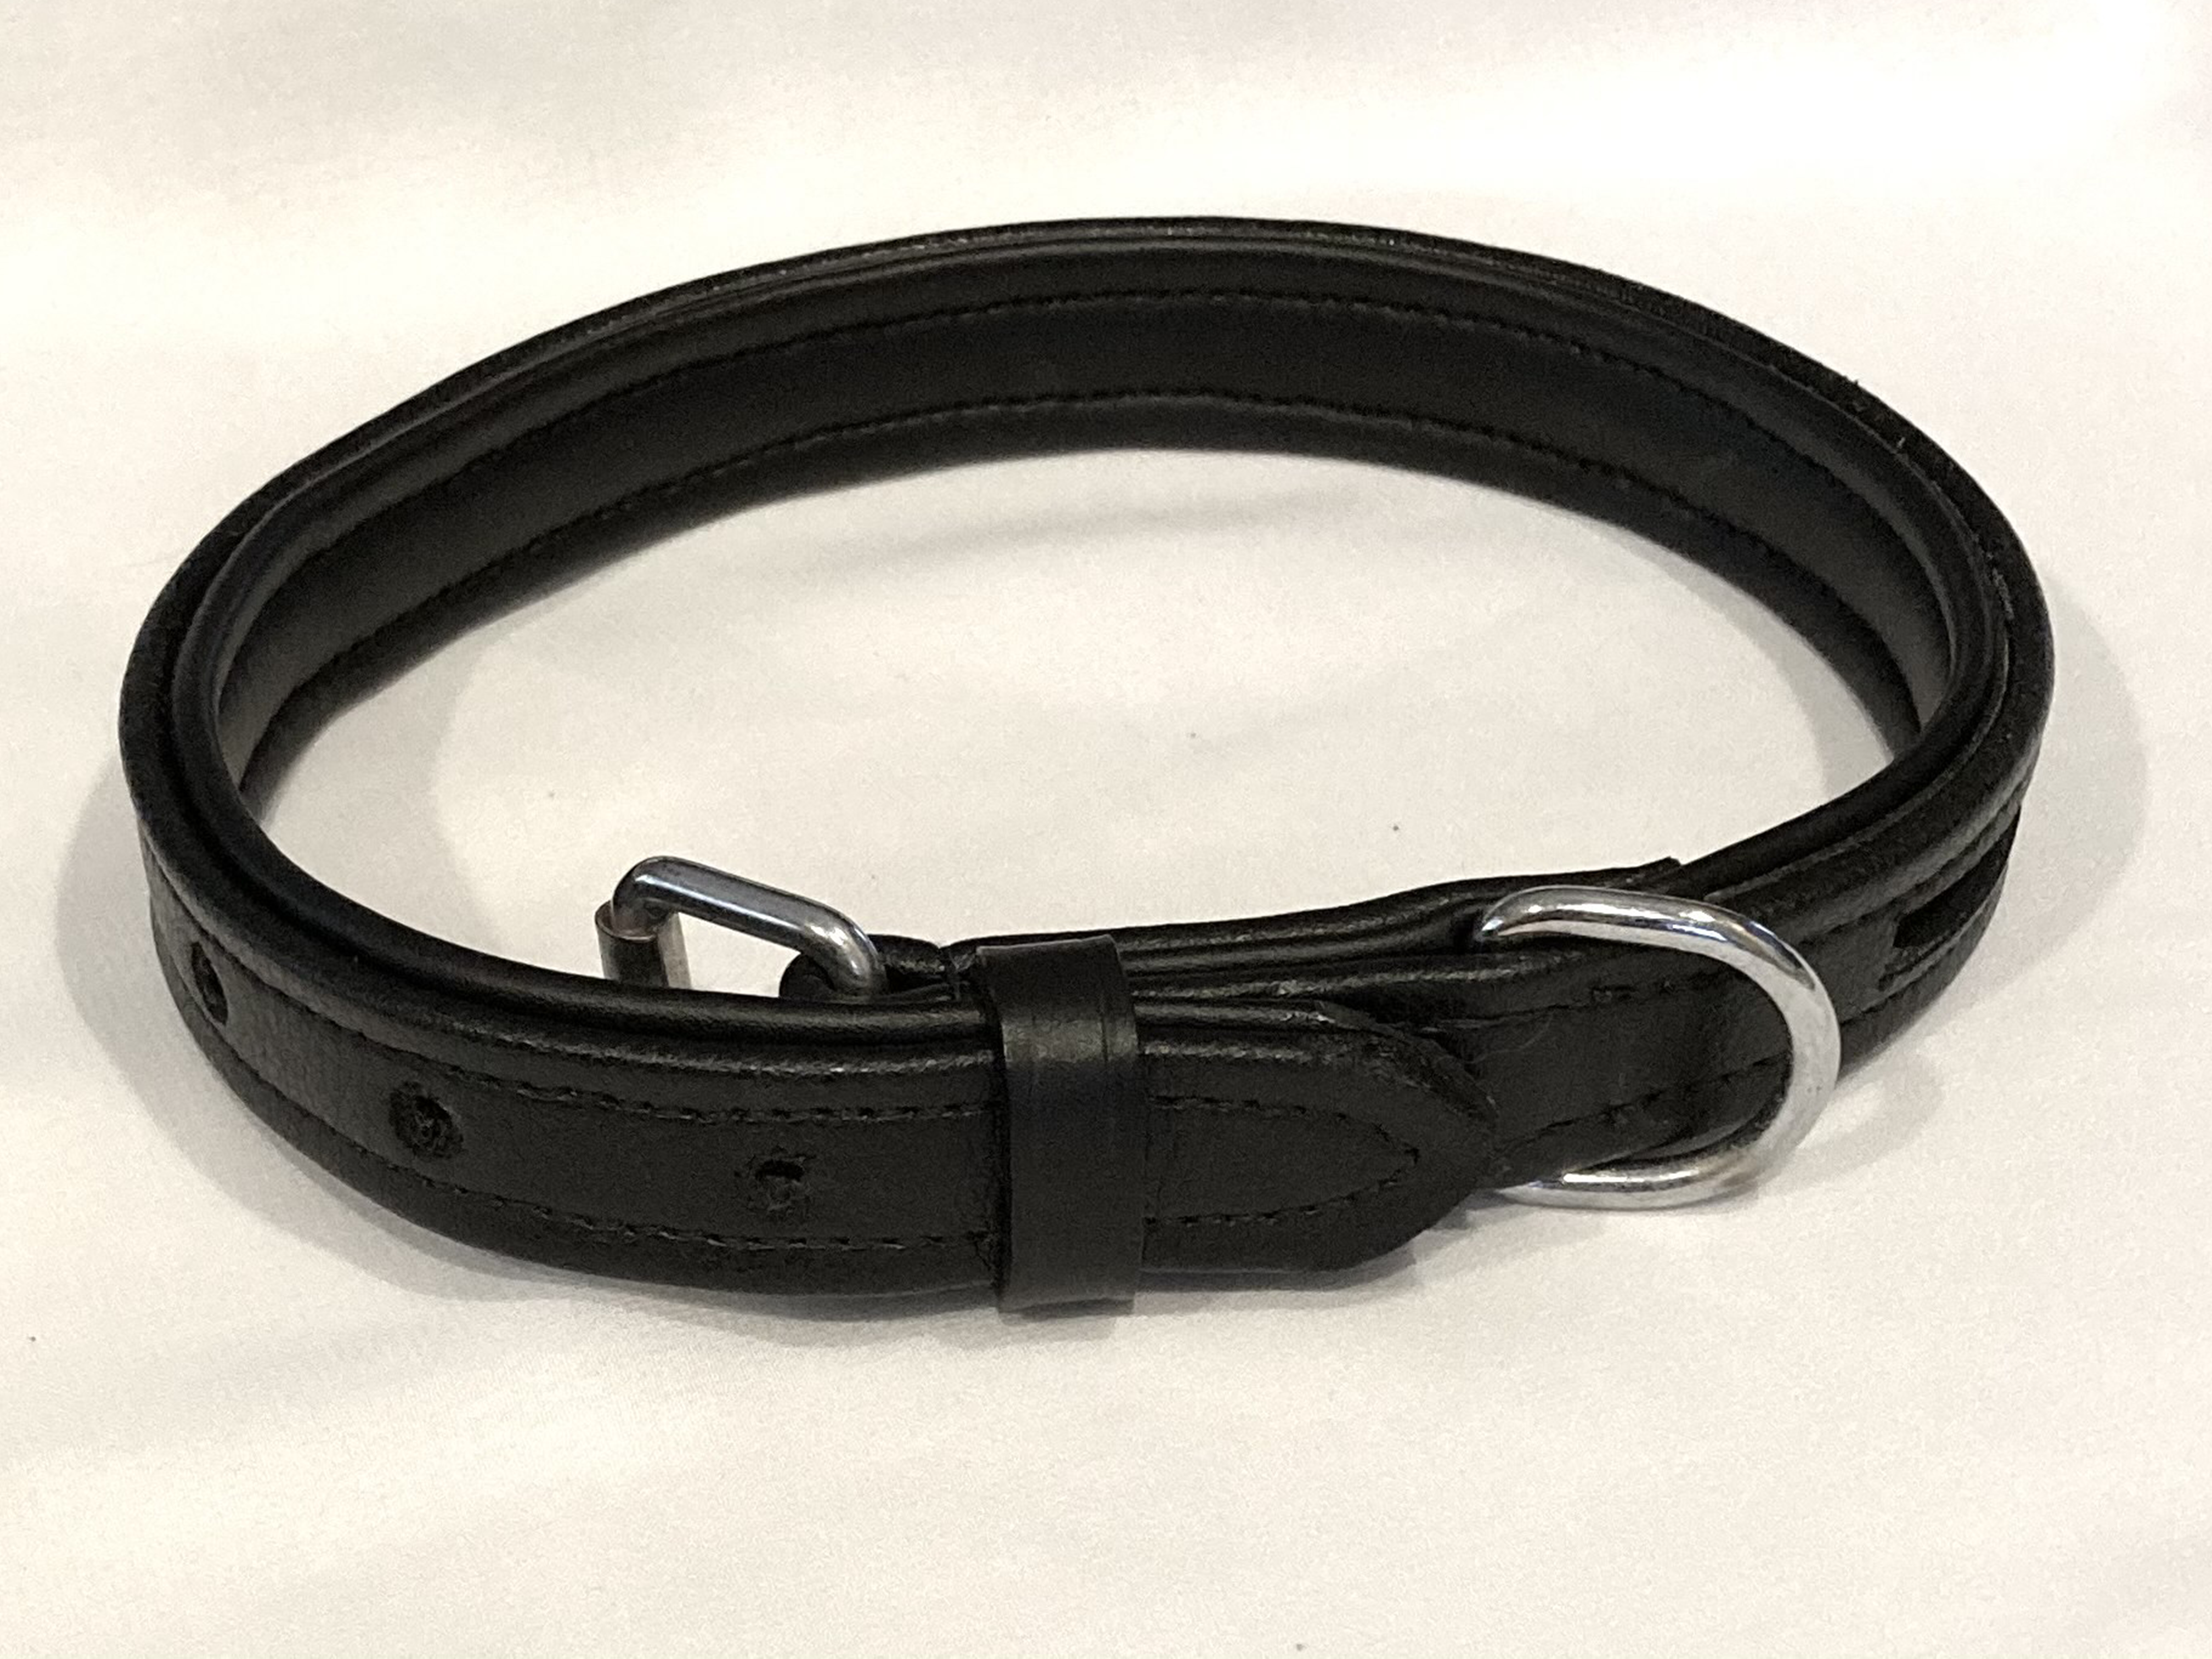 Empty Open Channel Leather Dog Collars